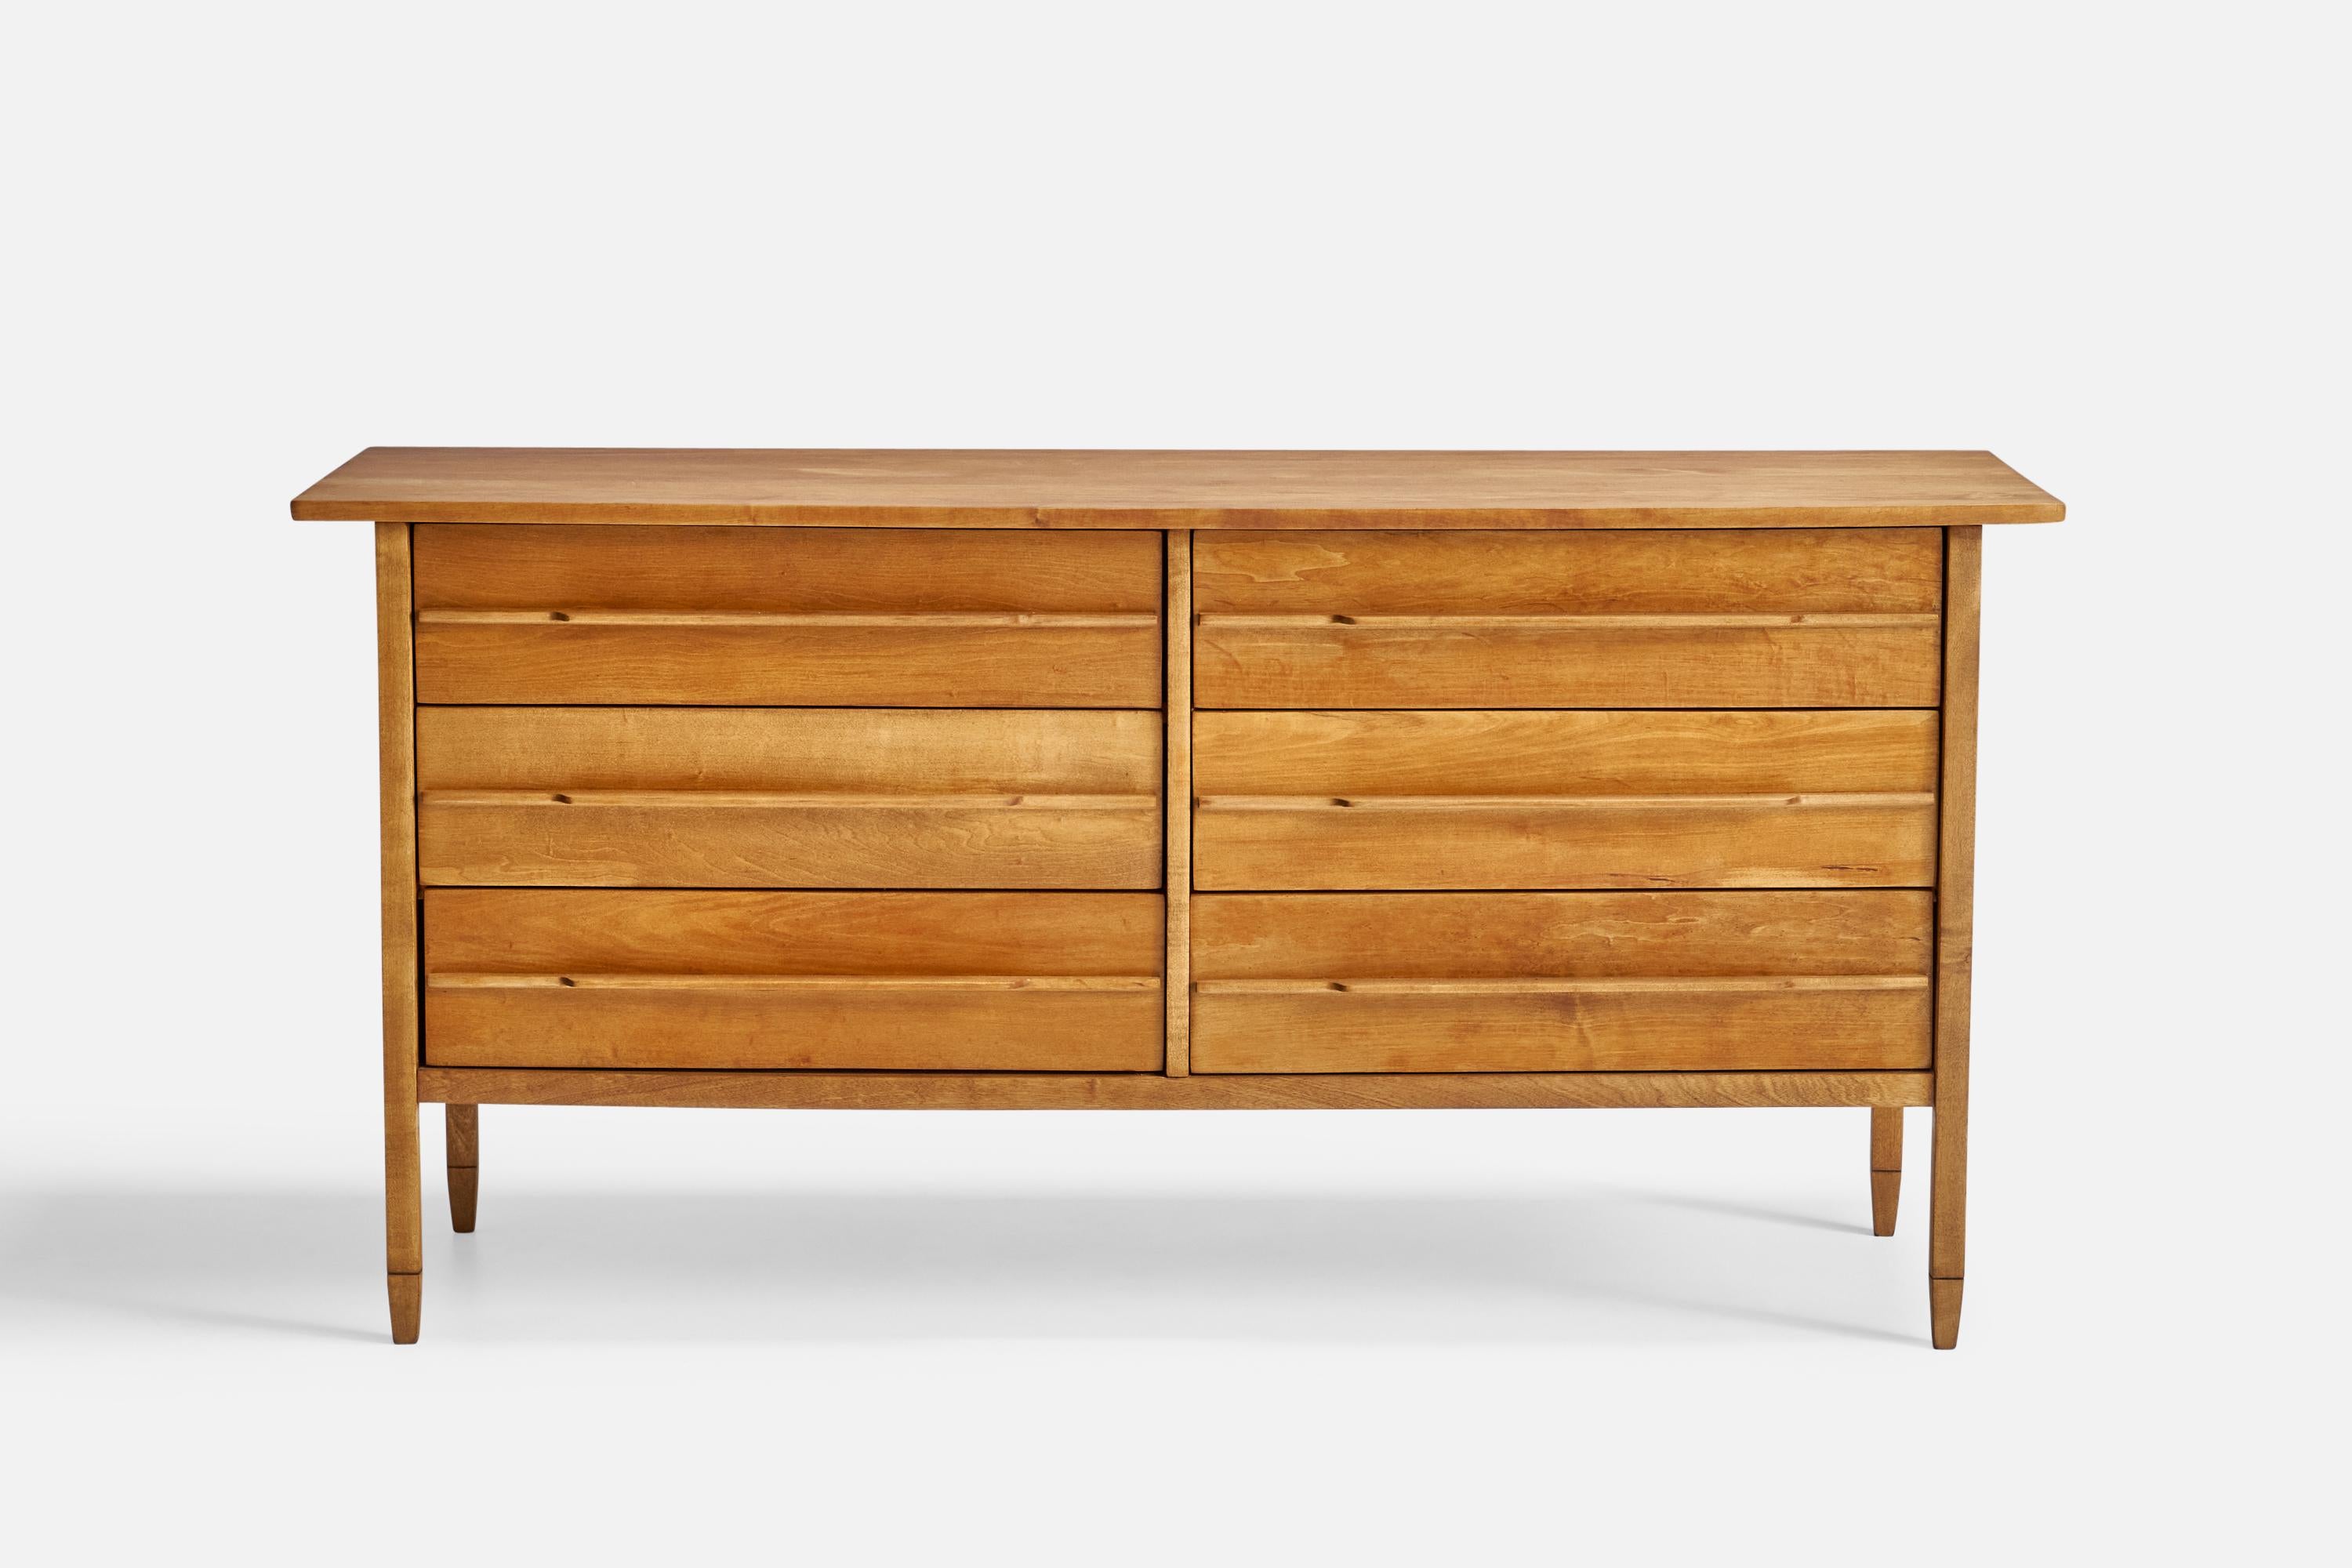 A maple dresser designed by Milo Baughman and produced by Murray Furniture Manufacture Company, Winchendon, Massachusetts, USA, 1950s.